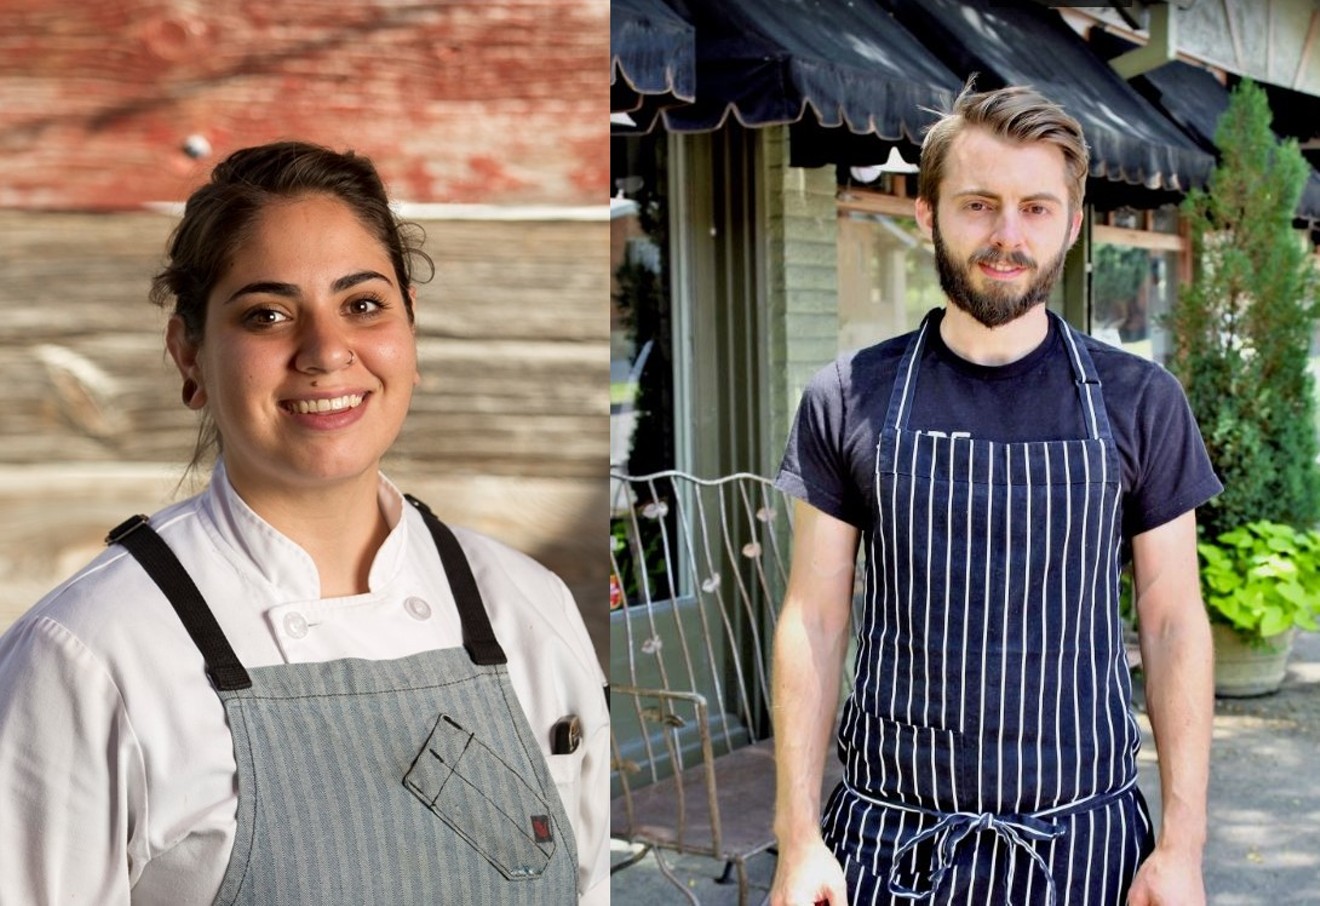 Chefs Sarah Khosravani and Jon Lavelle are heading the kitchens at Old Major and Fruition, respectively.